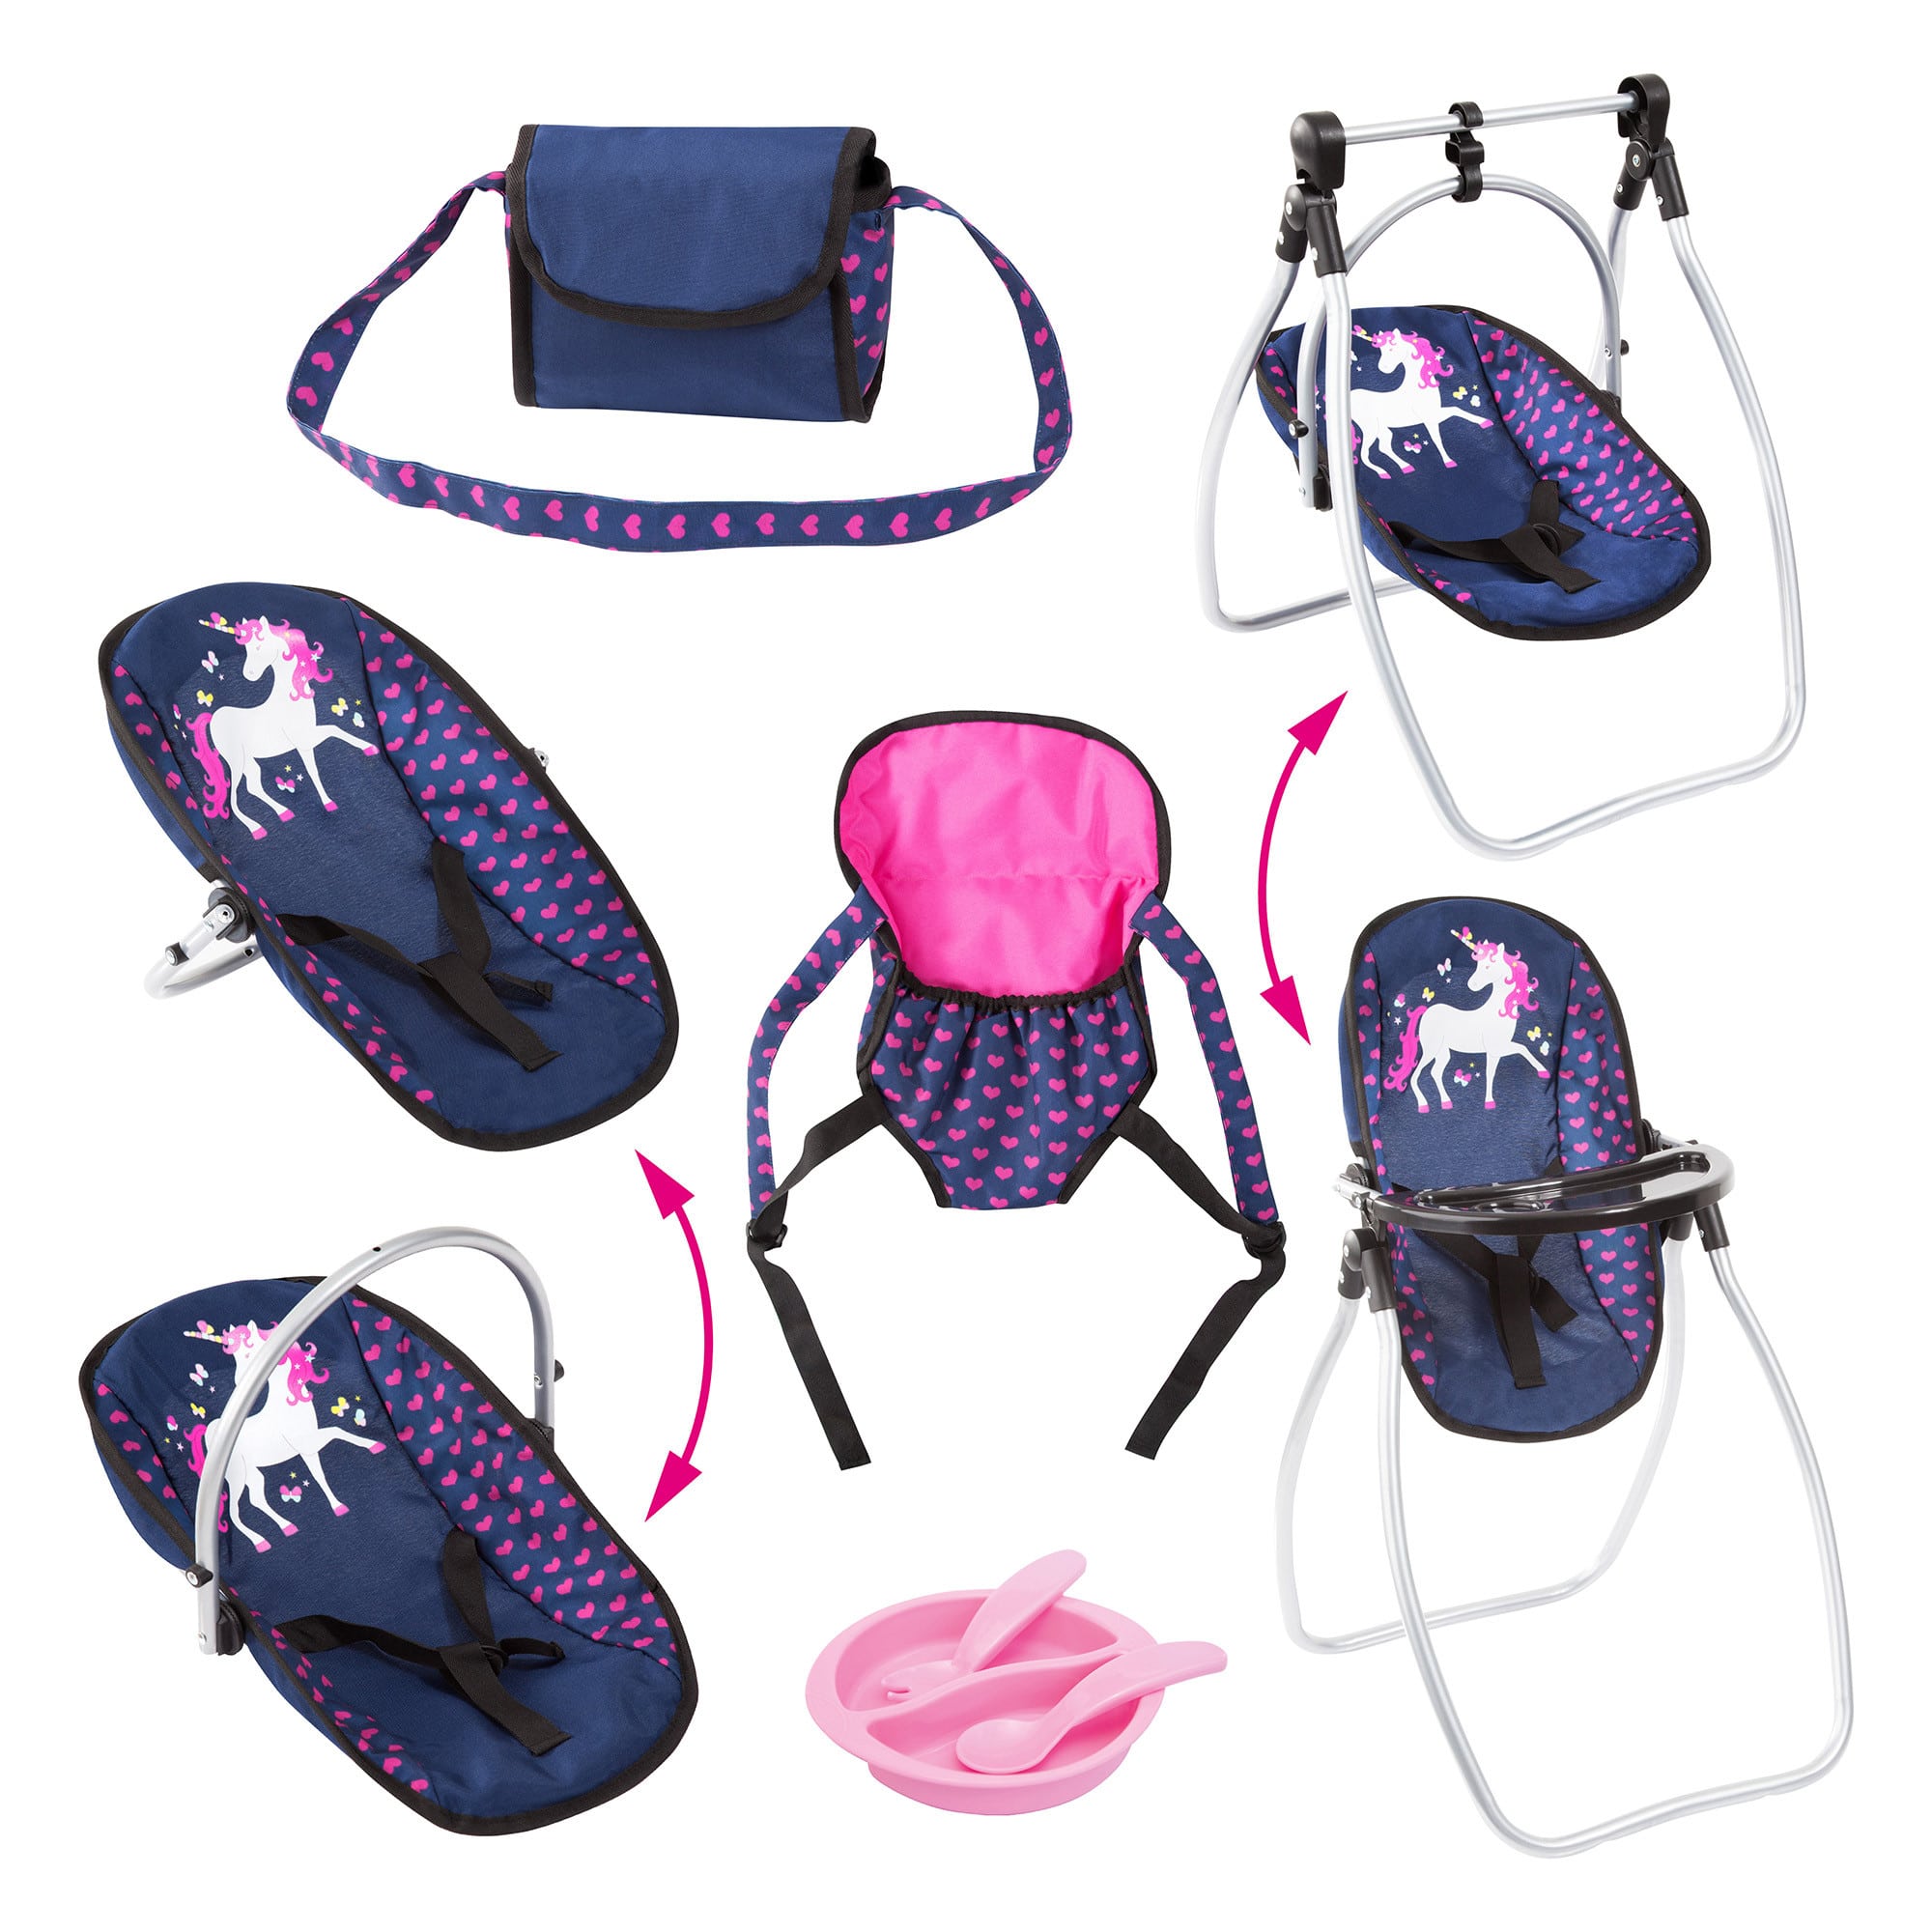 Bayer Vario 9-in-1 Doll Accessories Set - Blue with Pink Hearts